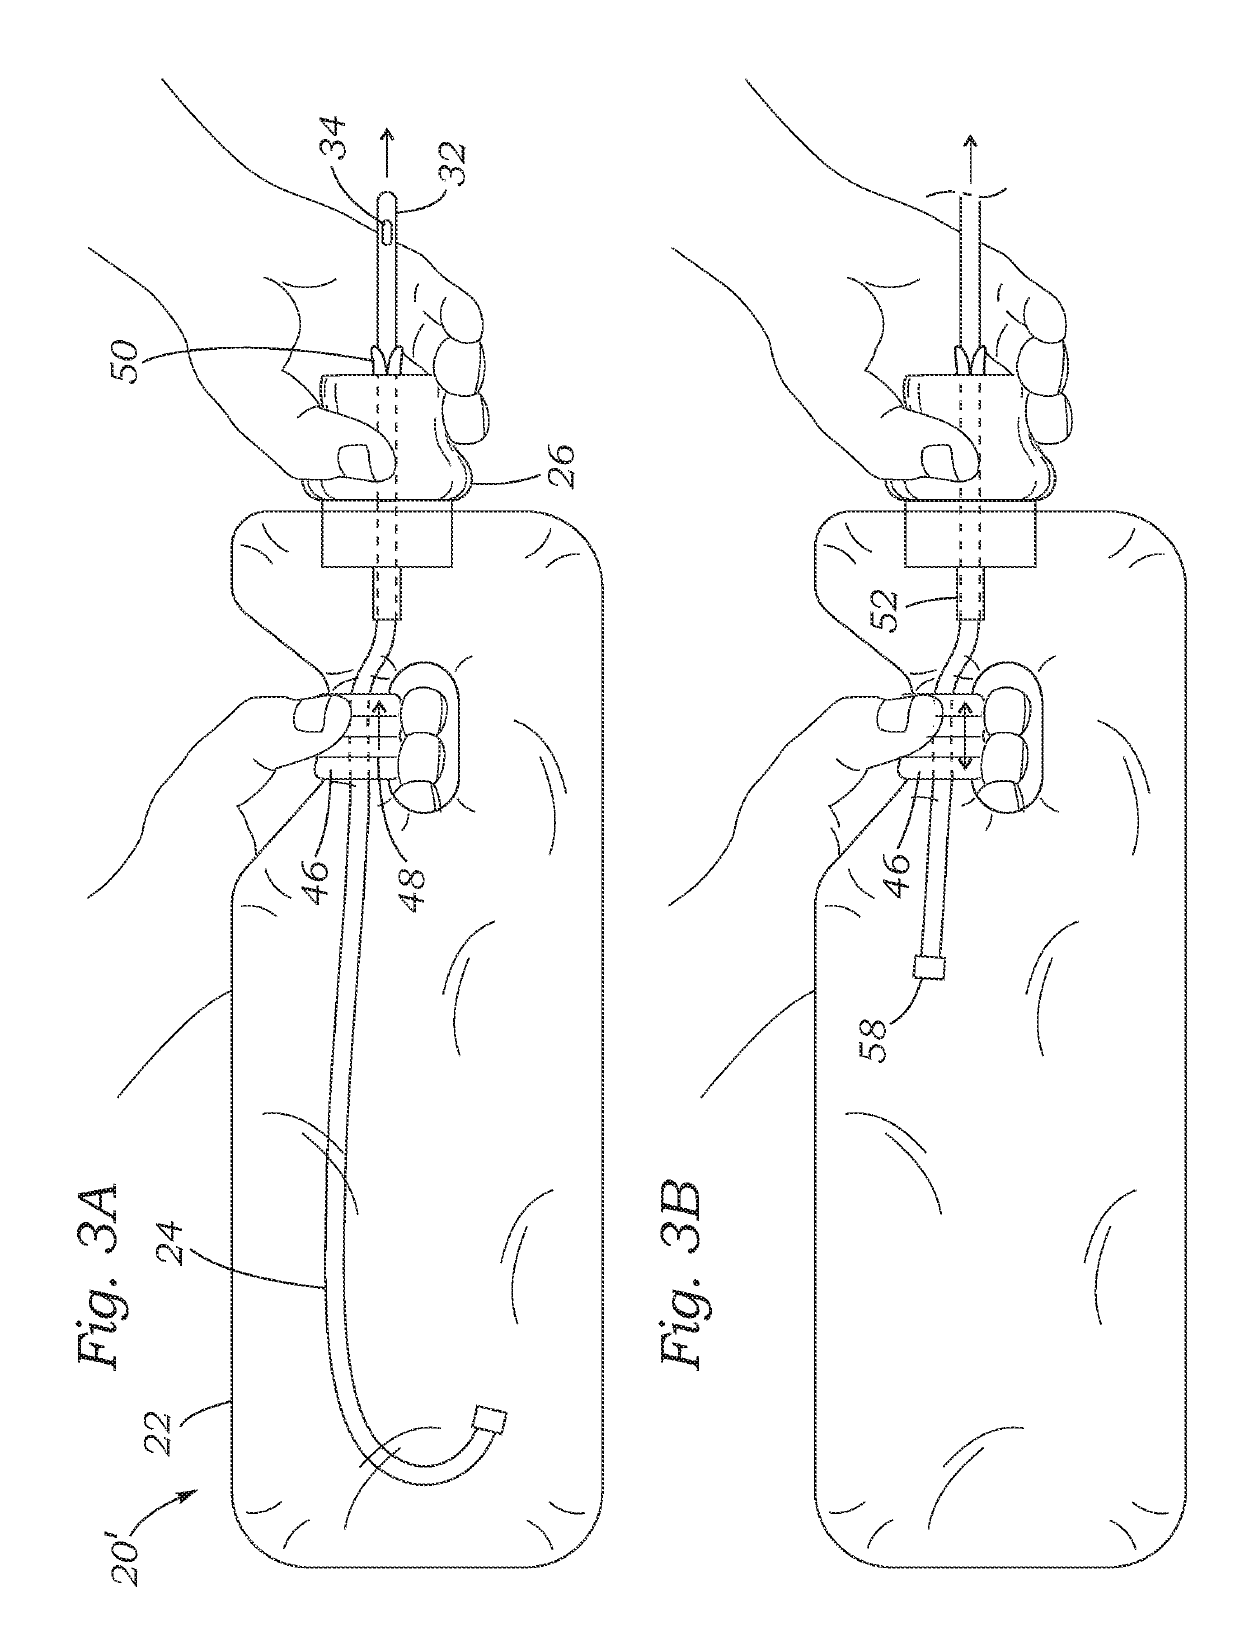 Closed system with intermittent urinary catheter feed